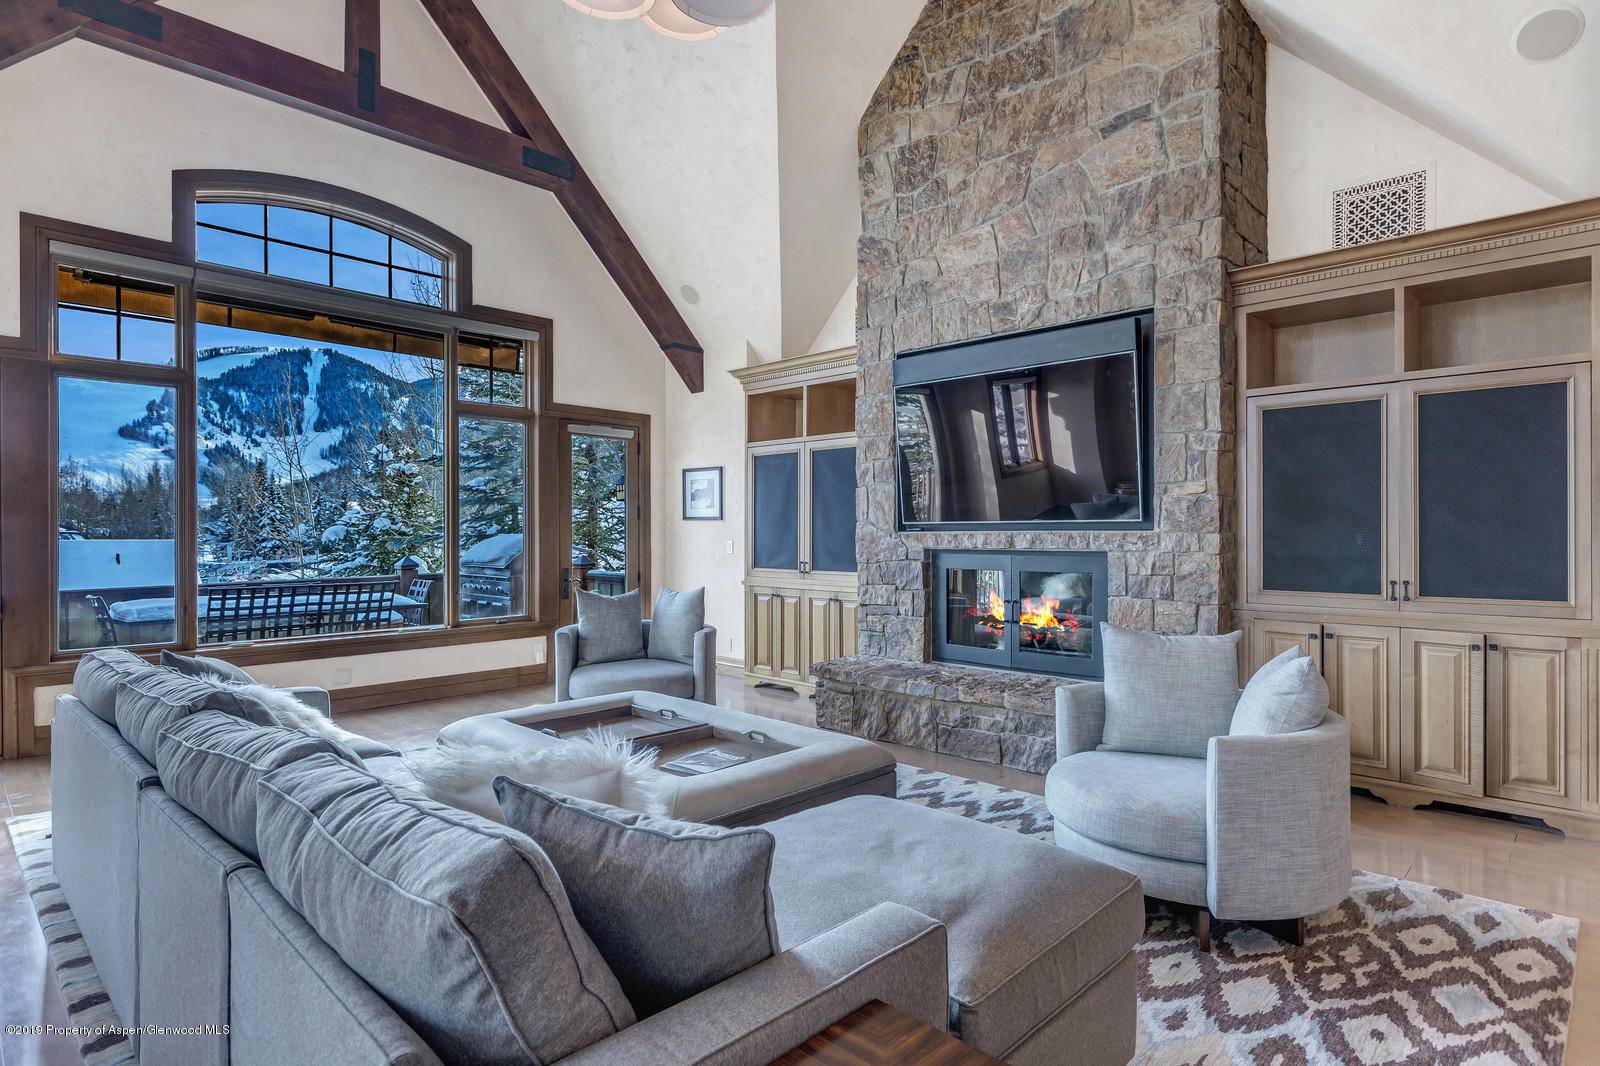 Beautiful contemporary home with true ski In ski out access to Tiehack and Buttermilk ski mountain.